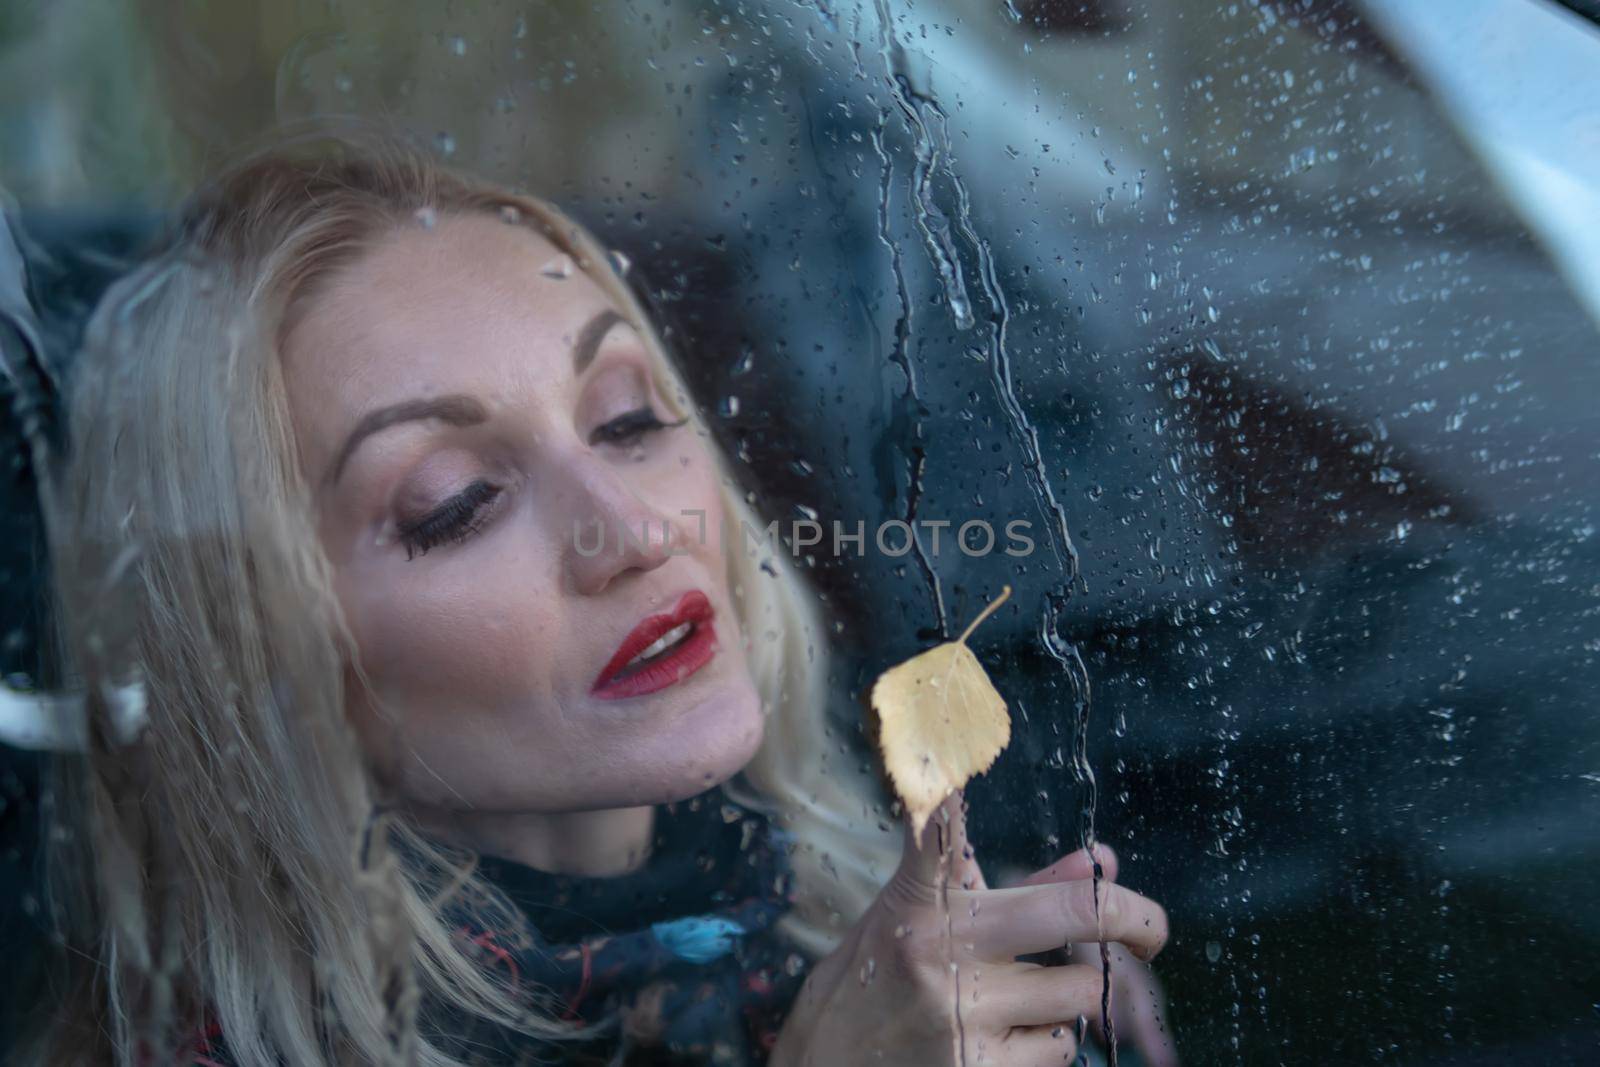 looks through the rainy glass, drops a young girl from the car window on the rain, in a black car. smiling at camera